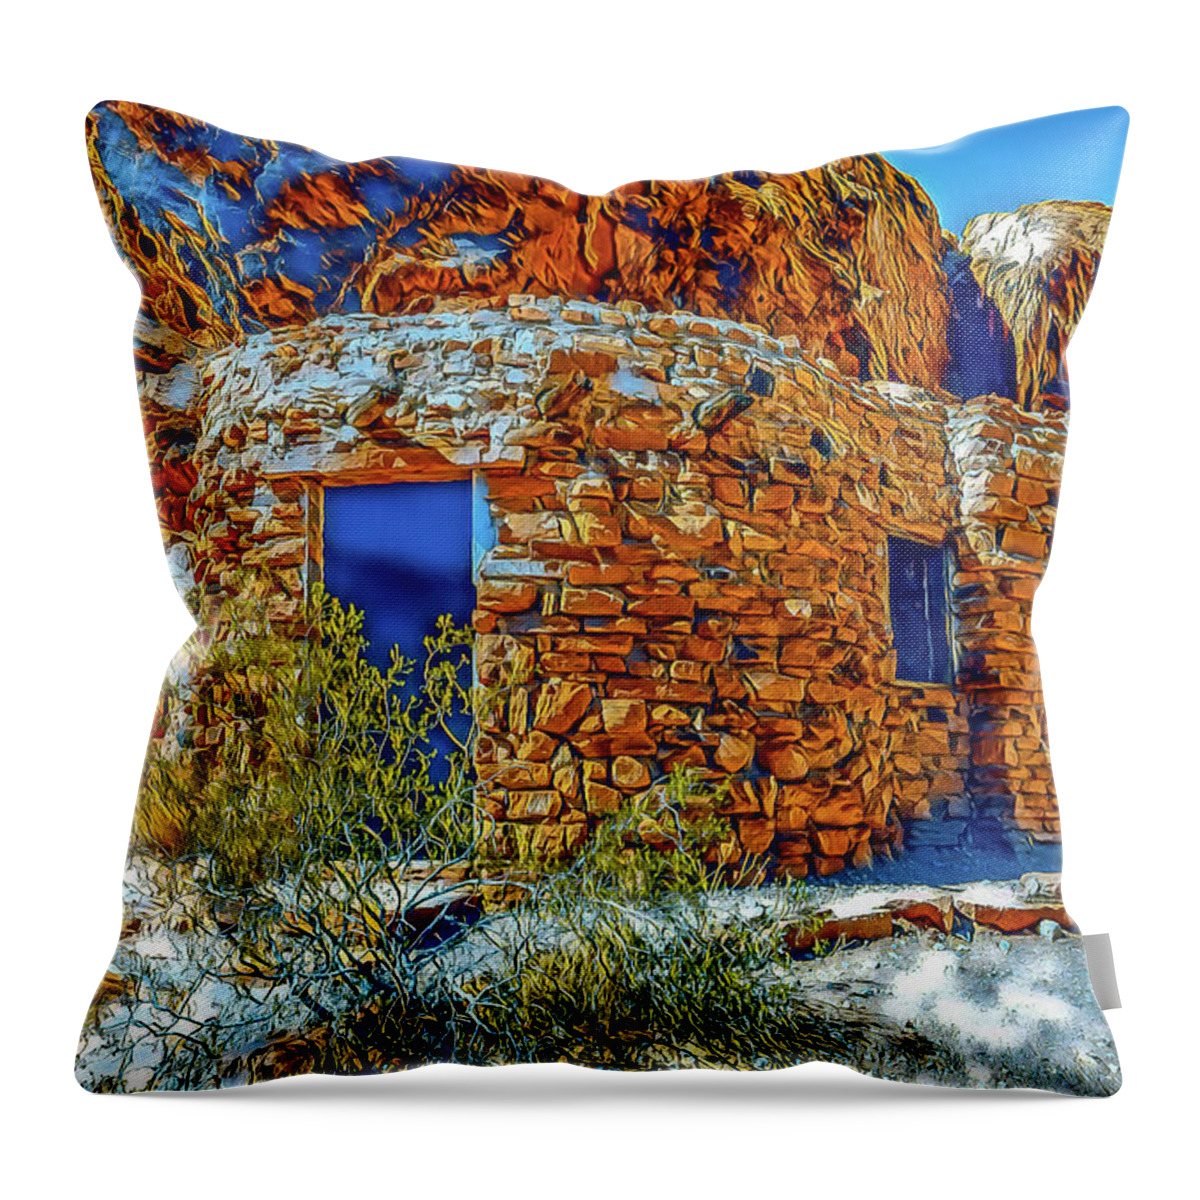 Stone House Throw Pillow featuring the digital art Historic Stone House by Jerry Cahill